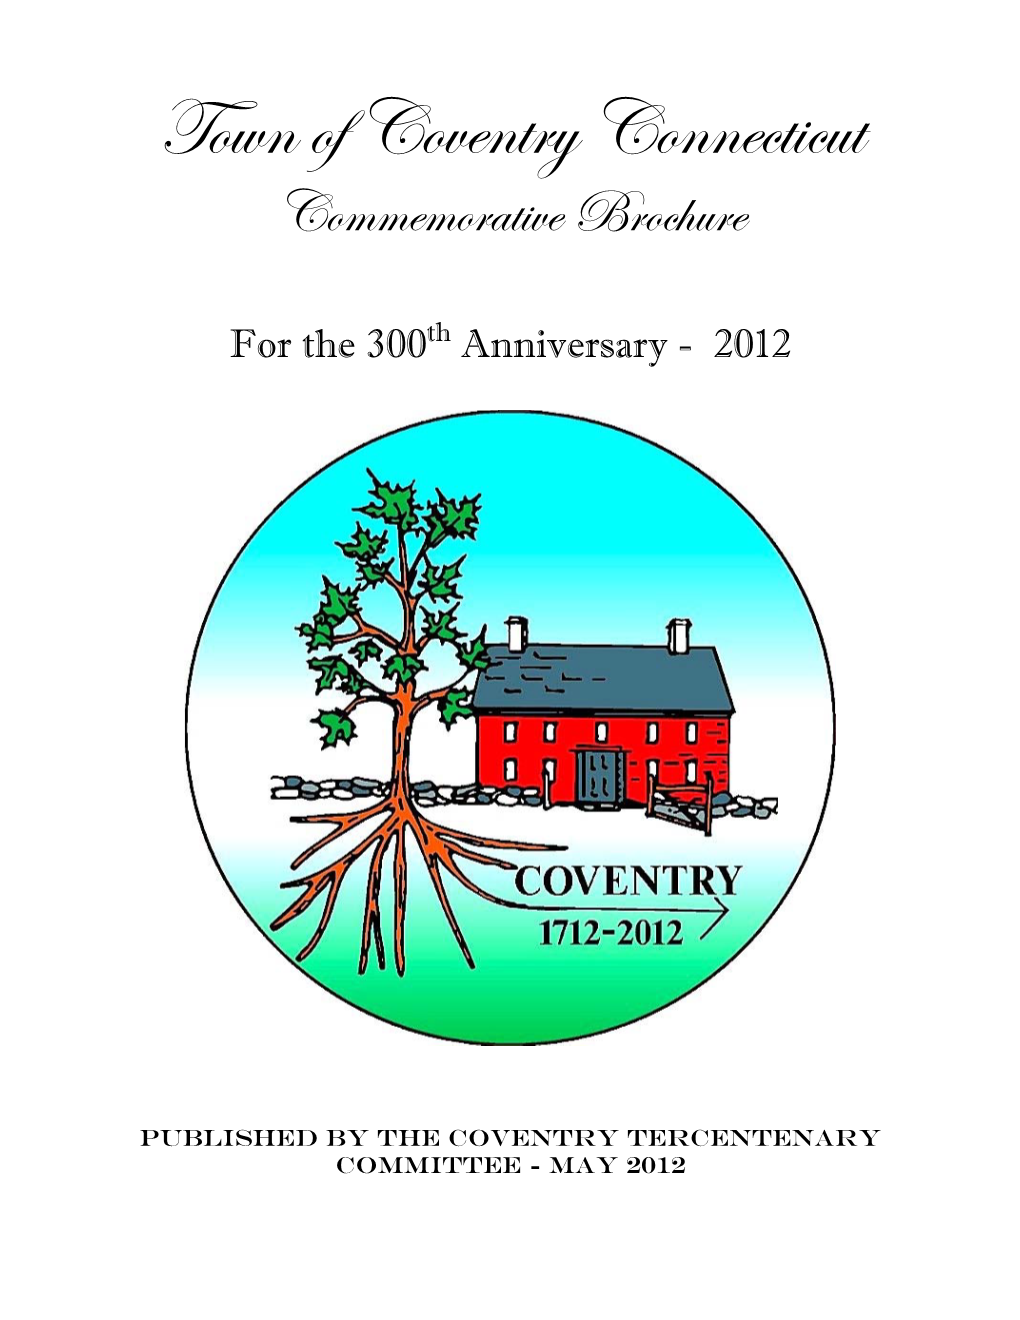 Town of Coventry Connecticut Commemorative Brochure